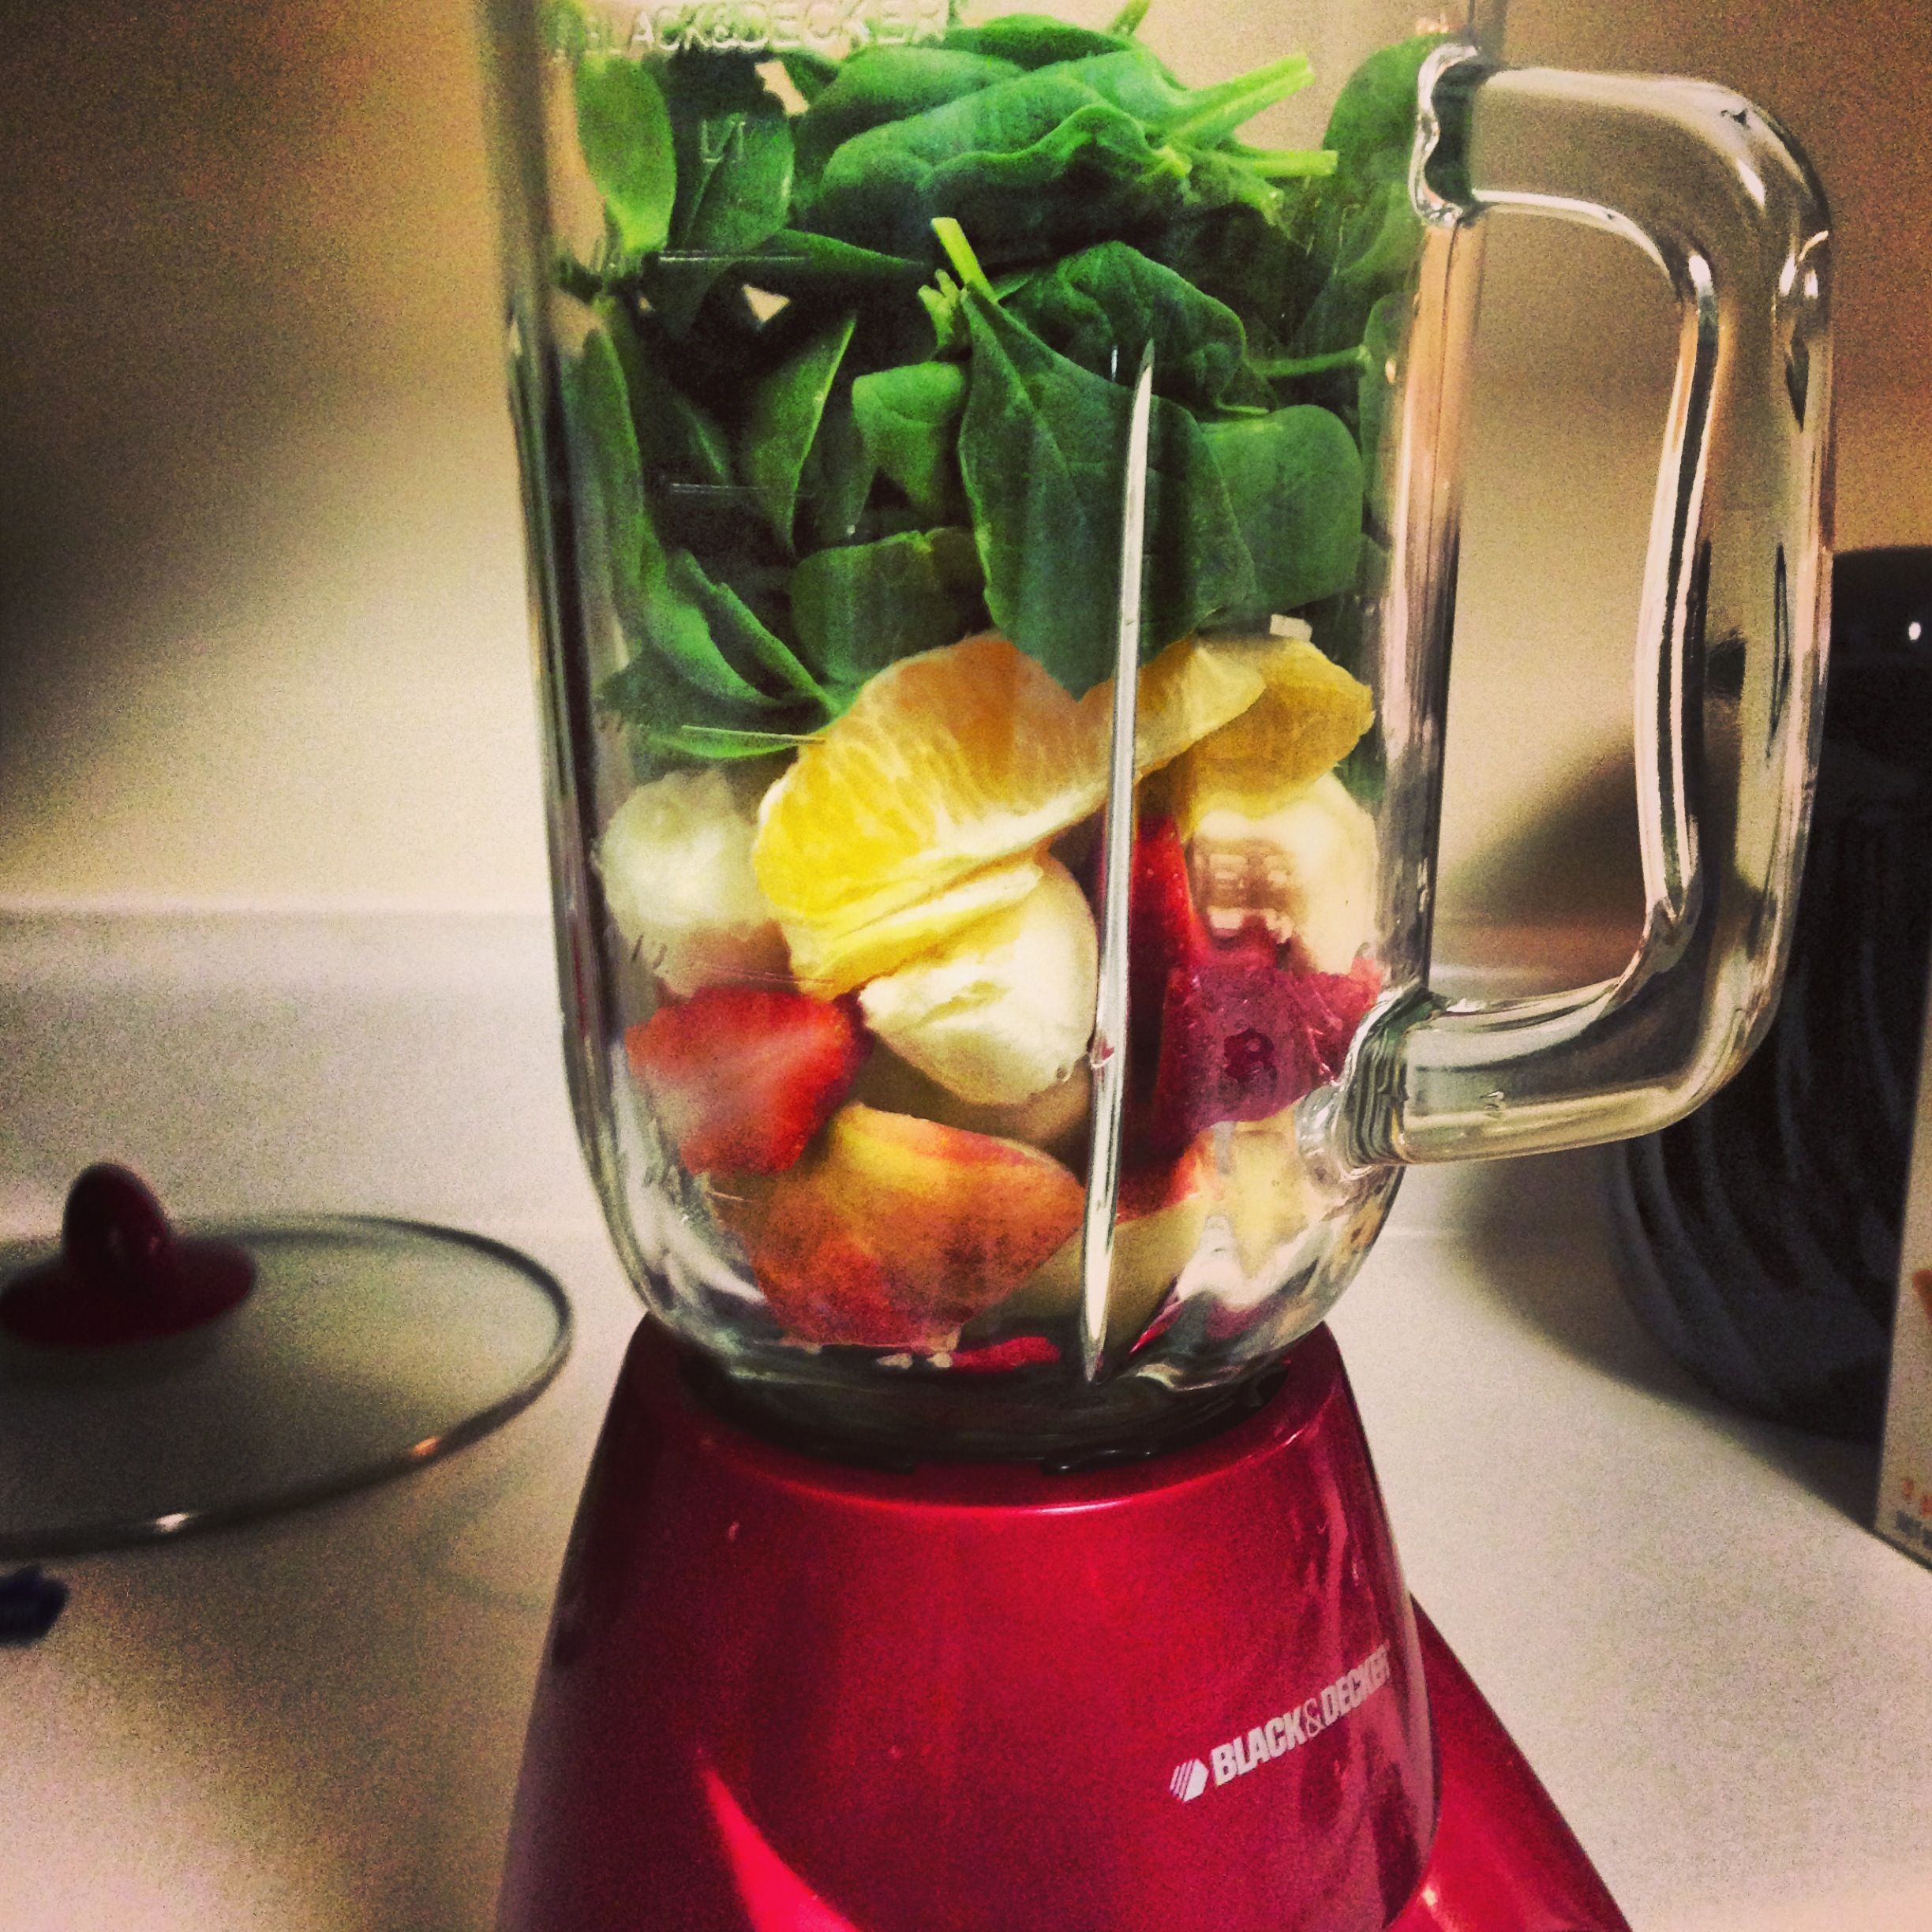 Green smoothie time! Starting to drink this as a meal ...